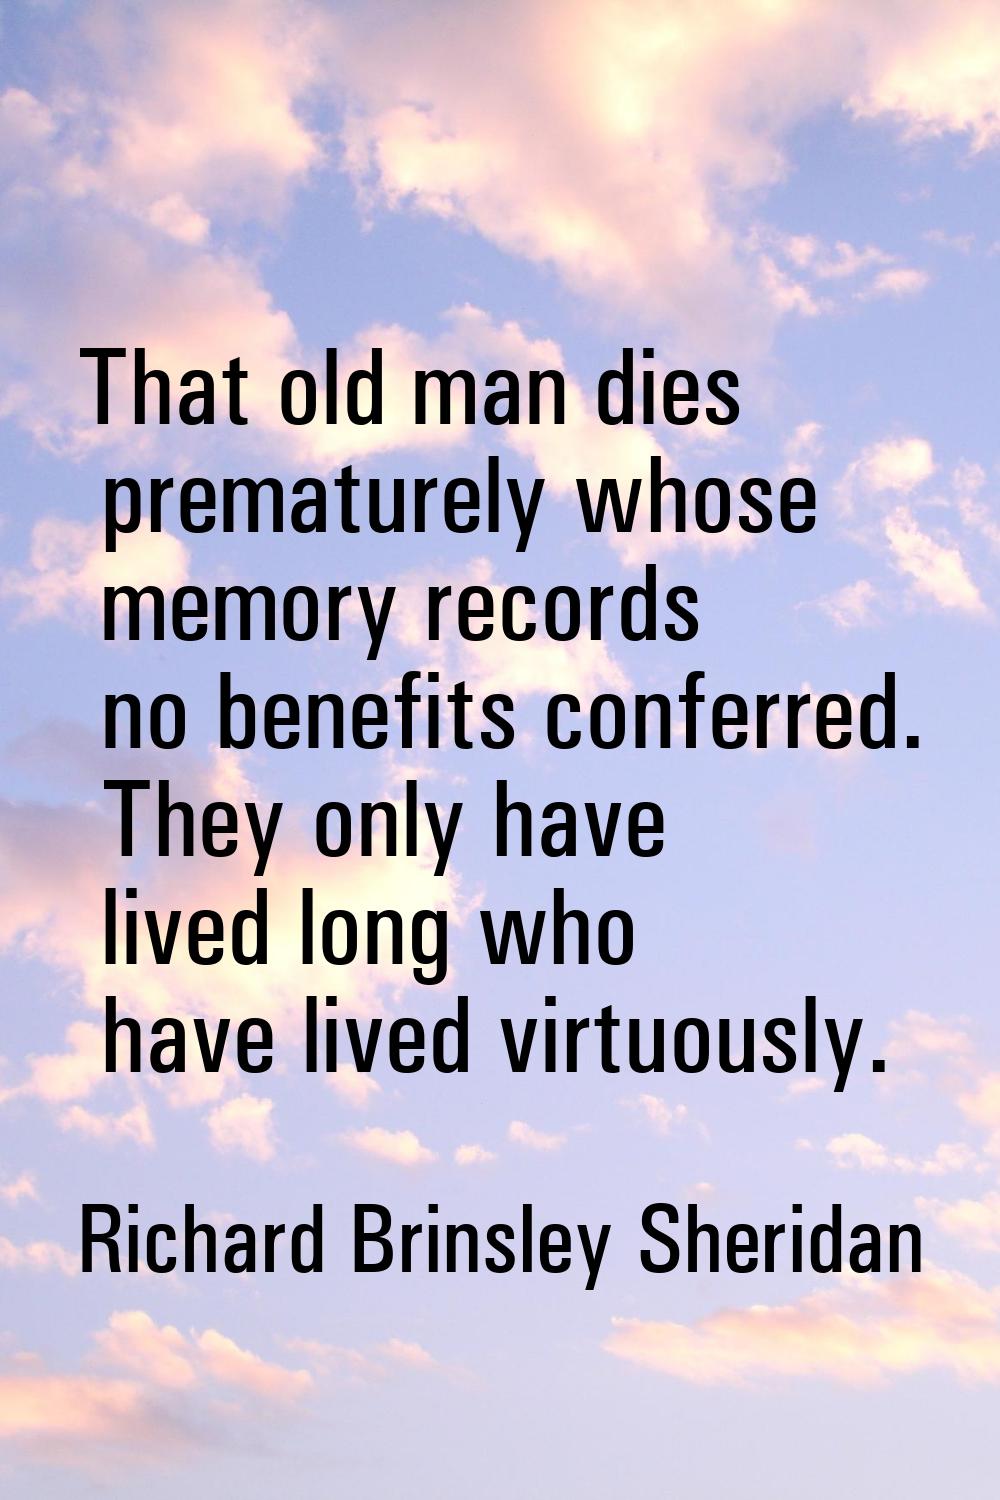 That old man dies prematurely whose memory records no benefits conferred. They only have lived long